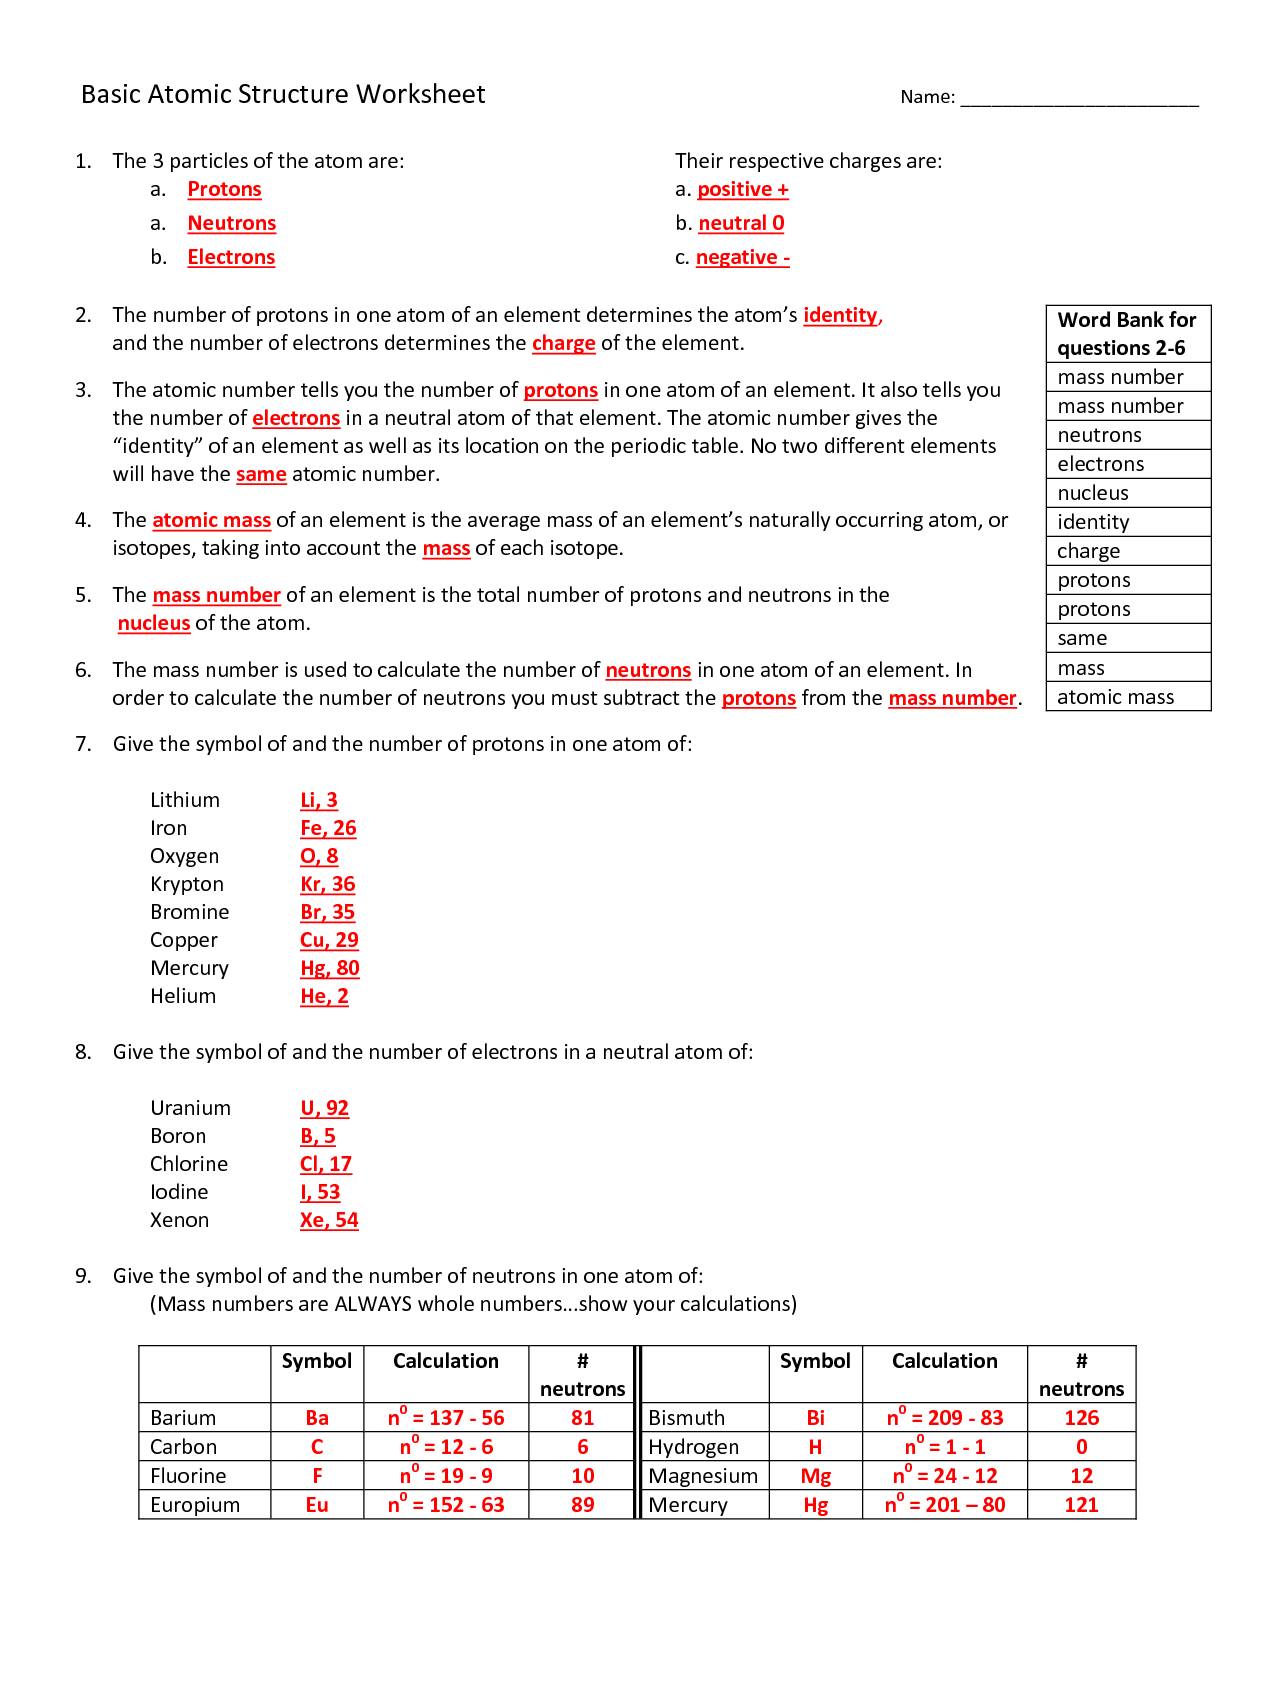 worksheet-atomic-structure-answer-key-escolagersonalvesgui